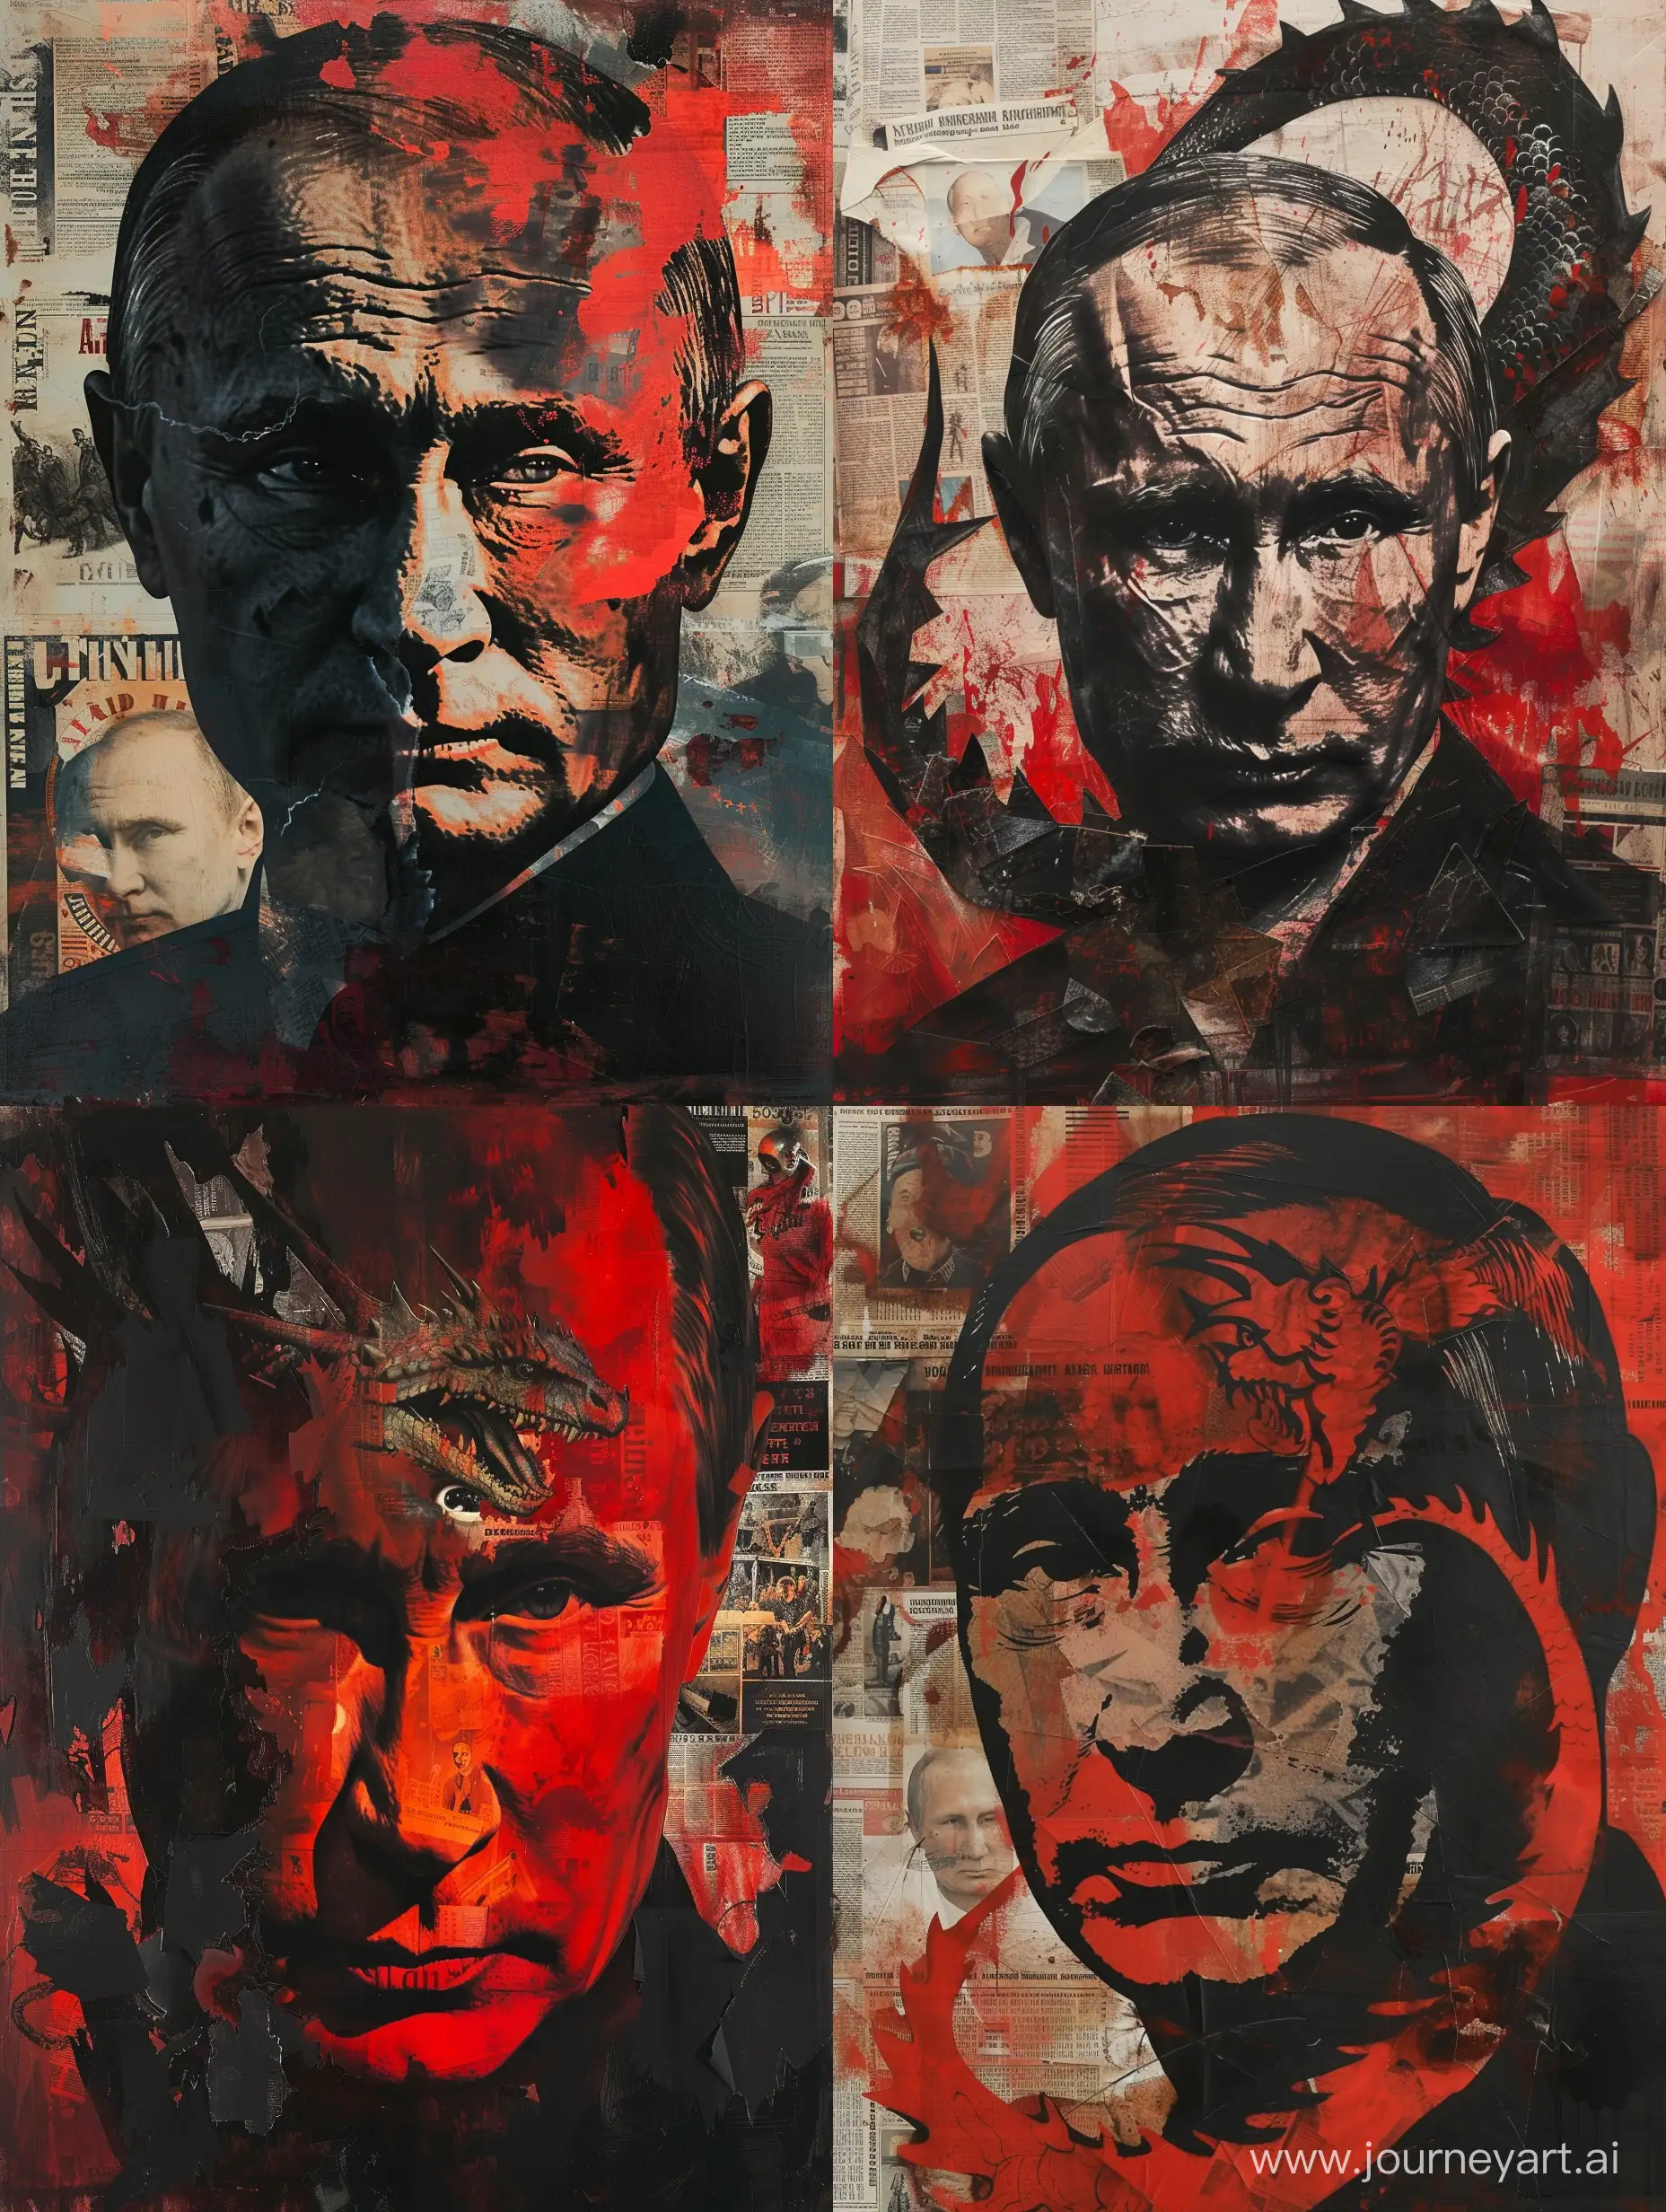 in the style of red and dark black,dragon art, mesmerizing optical illusions, xu beihong,bold shadows, very creative blend of face and paper, Impressionistic painting of Vladimir Putin, dystopian war world, Collage oil painting,  Like Konstantin Kachev art, parts of vintage magazines in background, strong texture, weather on canvas